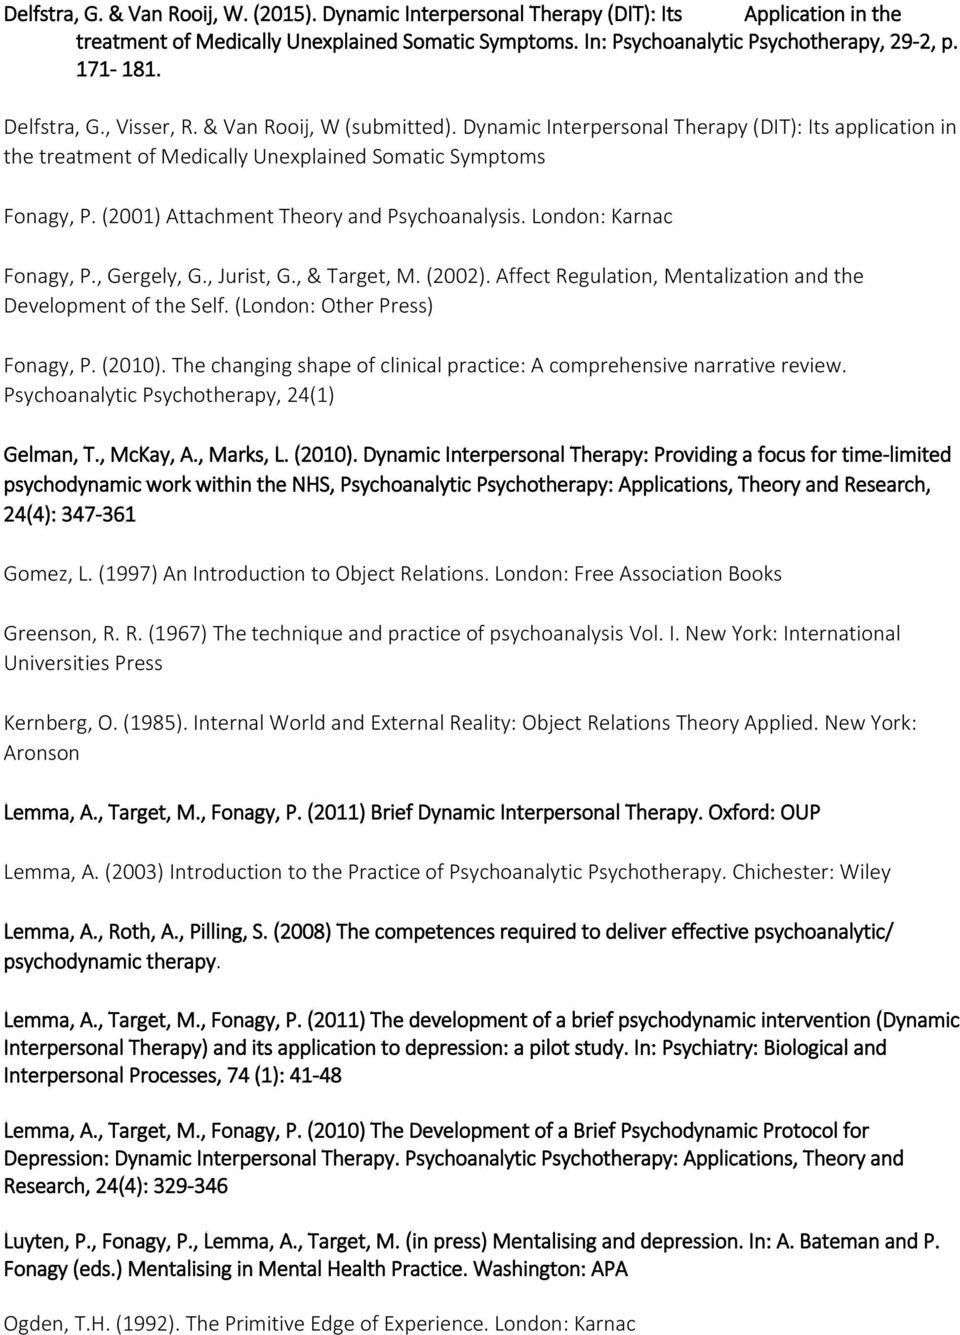 (2001) Attachment Theory and Psychoanalysis. London: Karnac Fonagy, P., Gergely, G., Jurist, G., & Target, M. (2002). Affect Regulation, Mentalization and the Development of the Self.